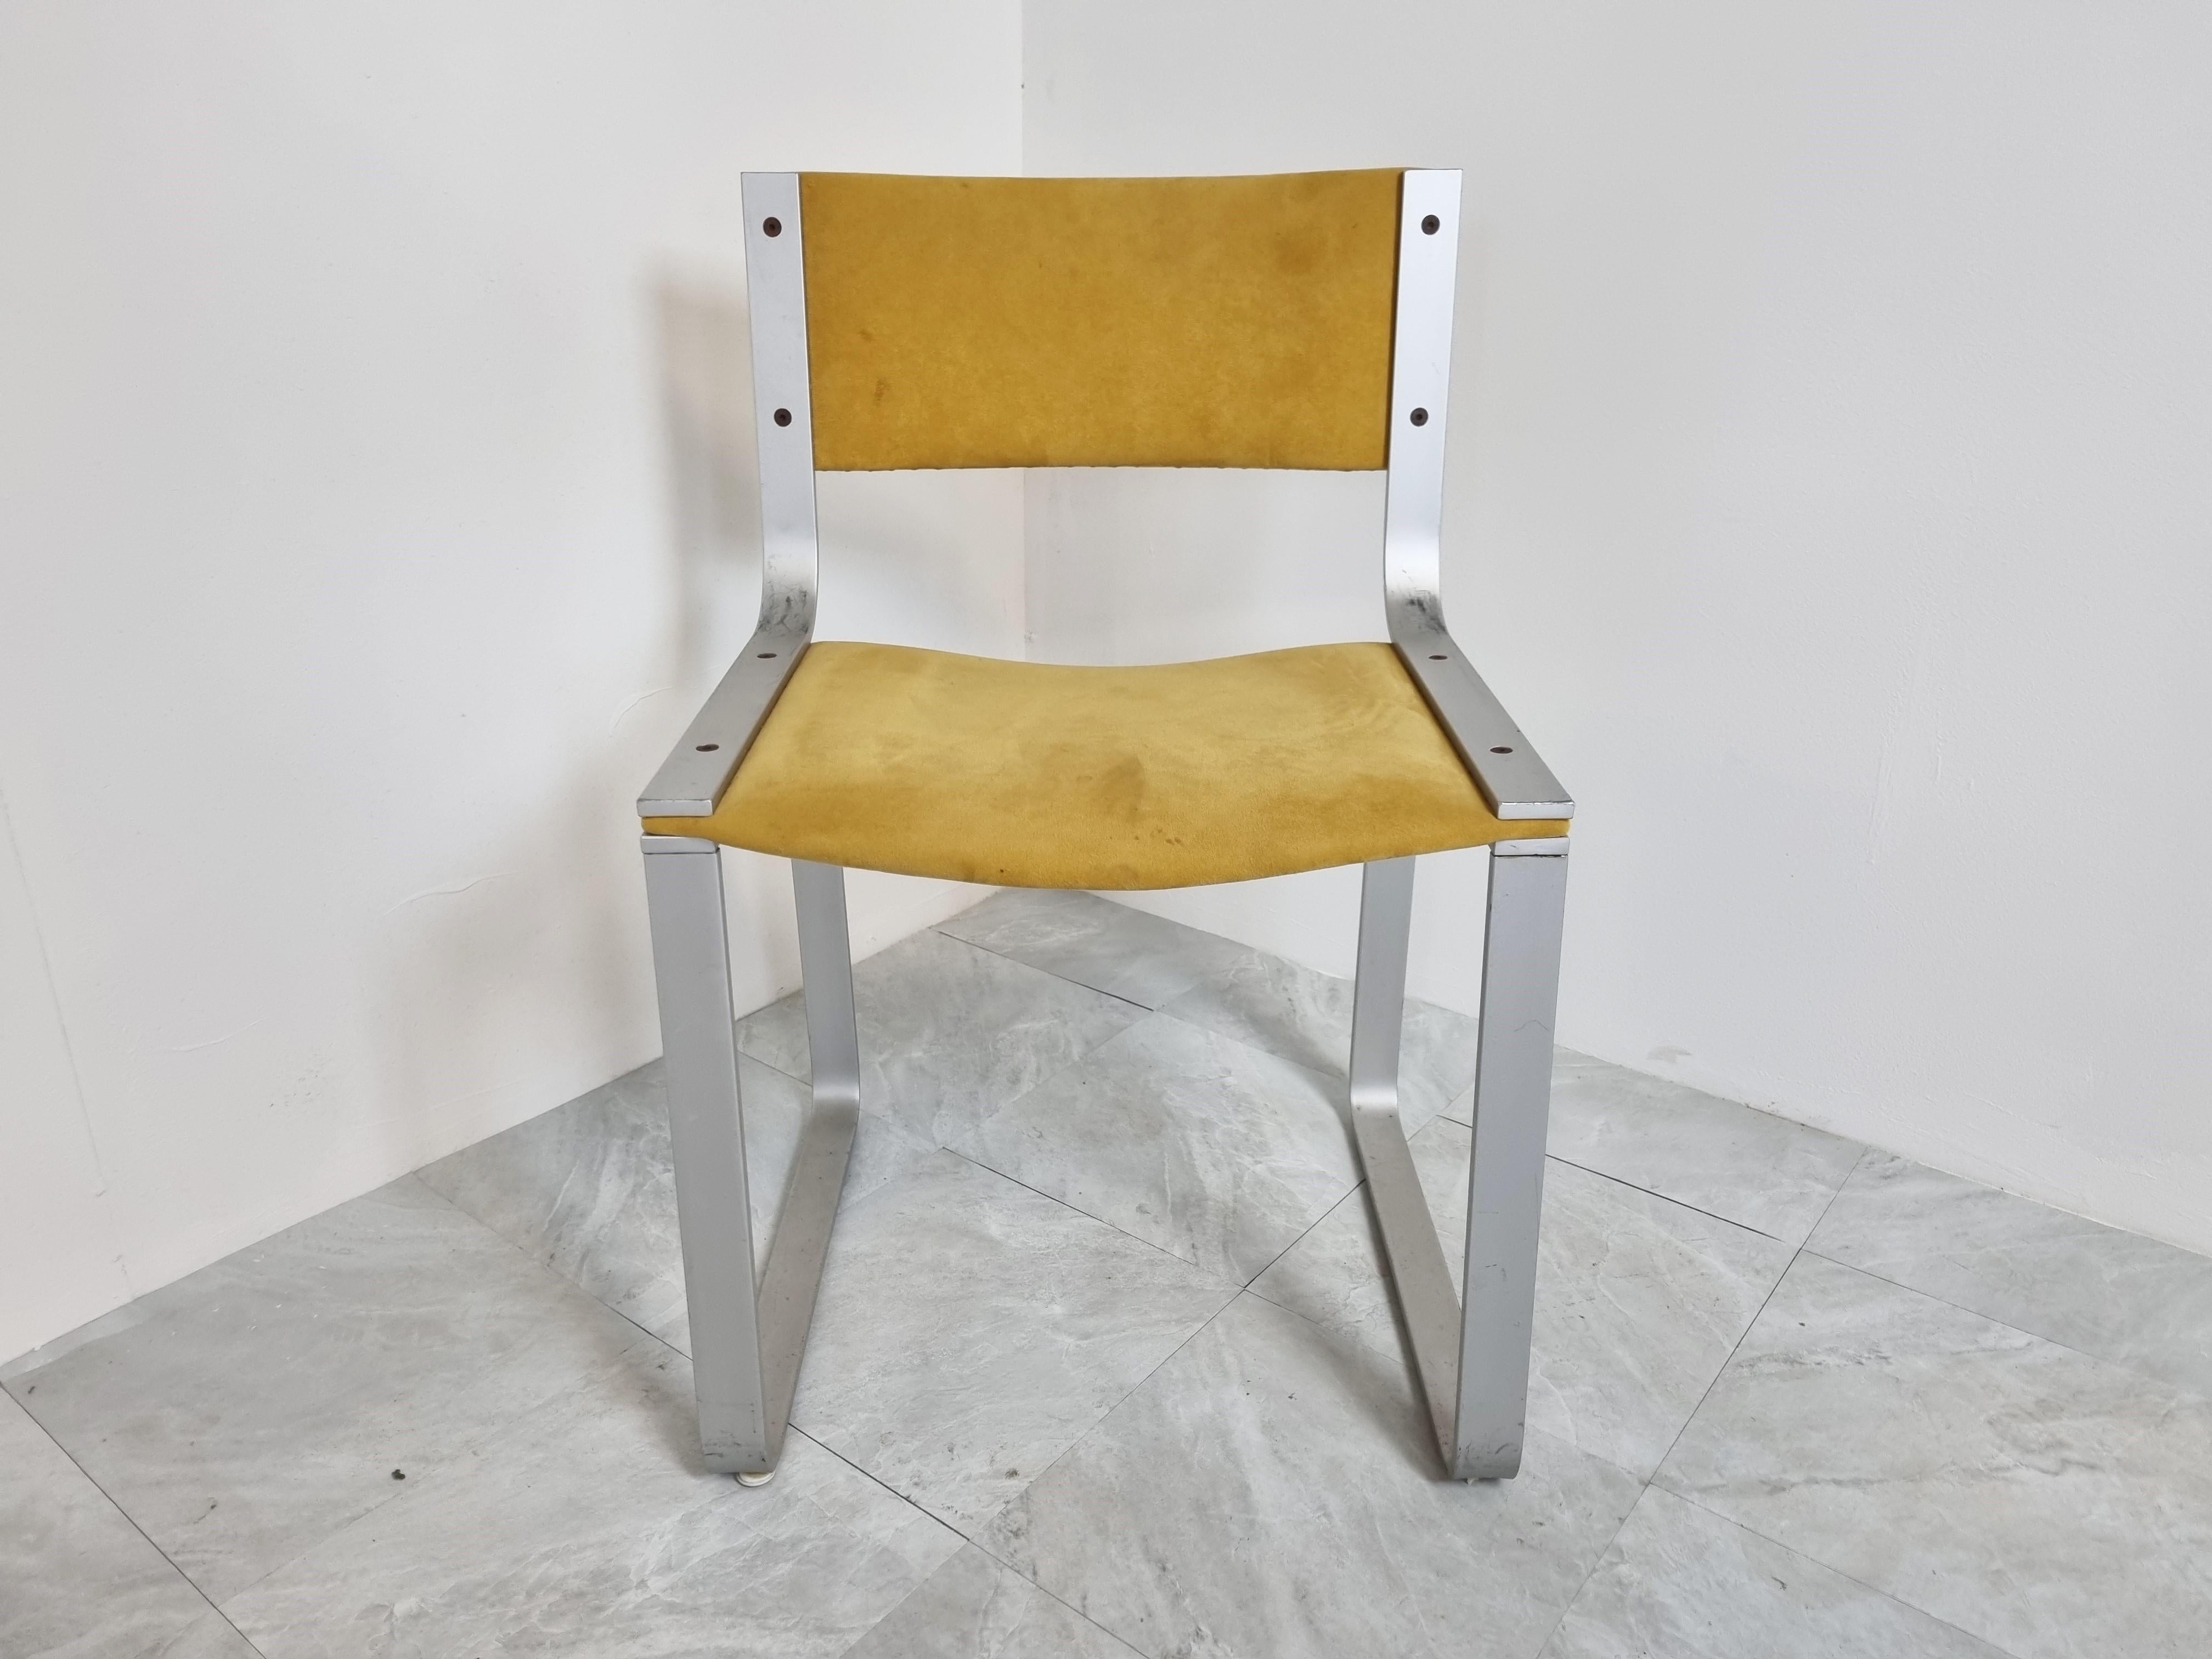 Late 20th Century SM0301 Dining Chairs by Pierre Mazairac for Pastoe, 1970s '6 Pieces in Stock'